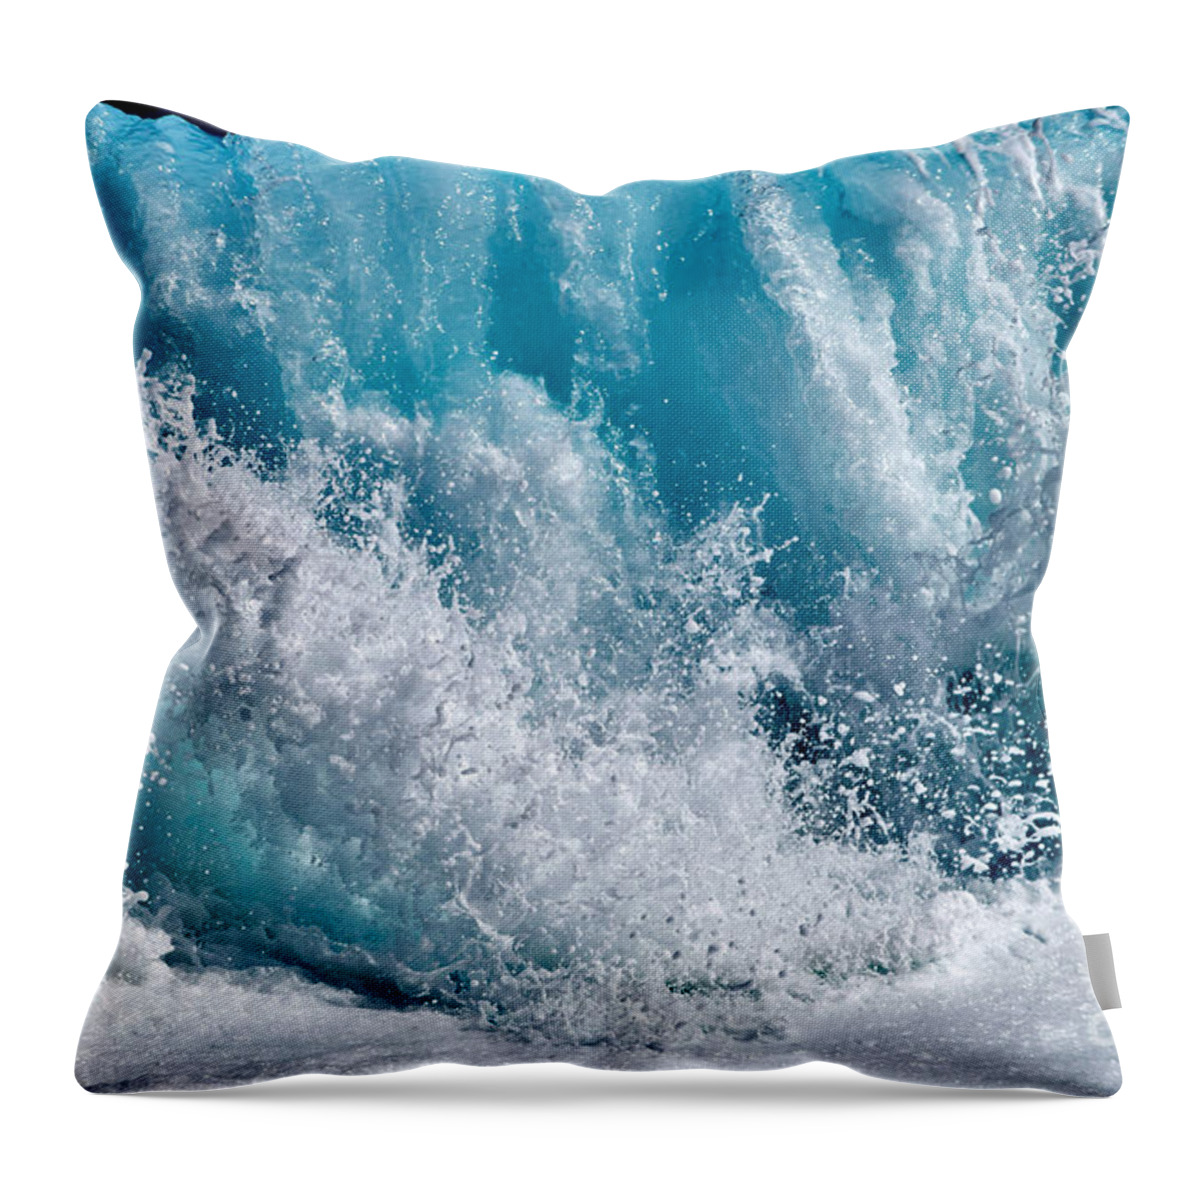 Hawaii Throw Pillow featuring the photograph Wave Waterfall Crystal Blue by Debra Banks